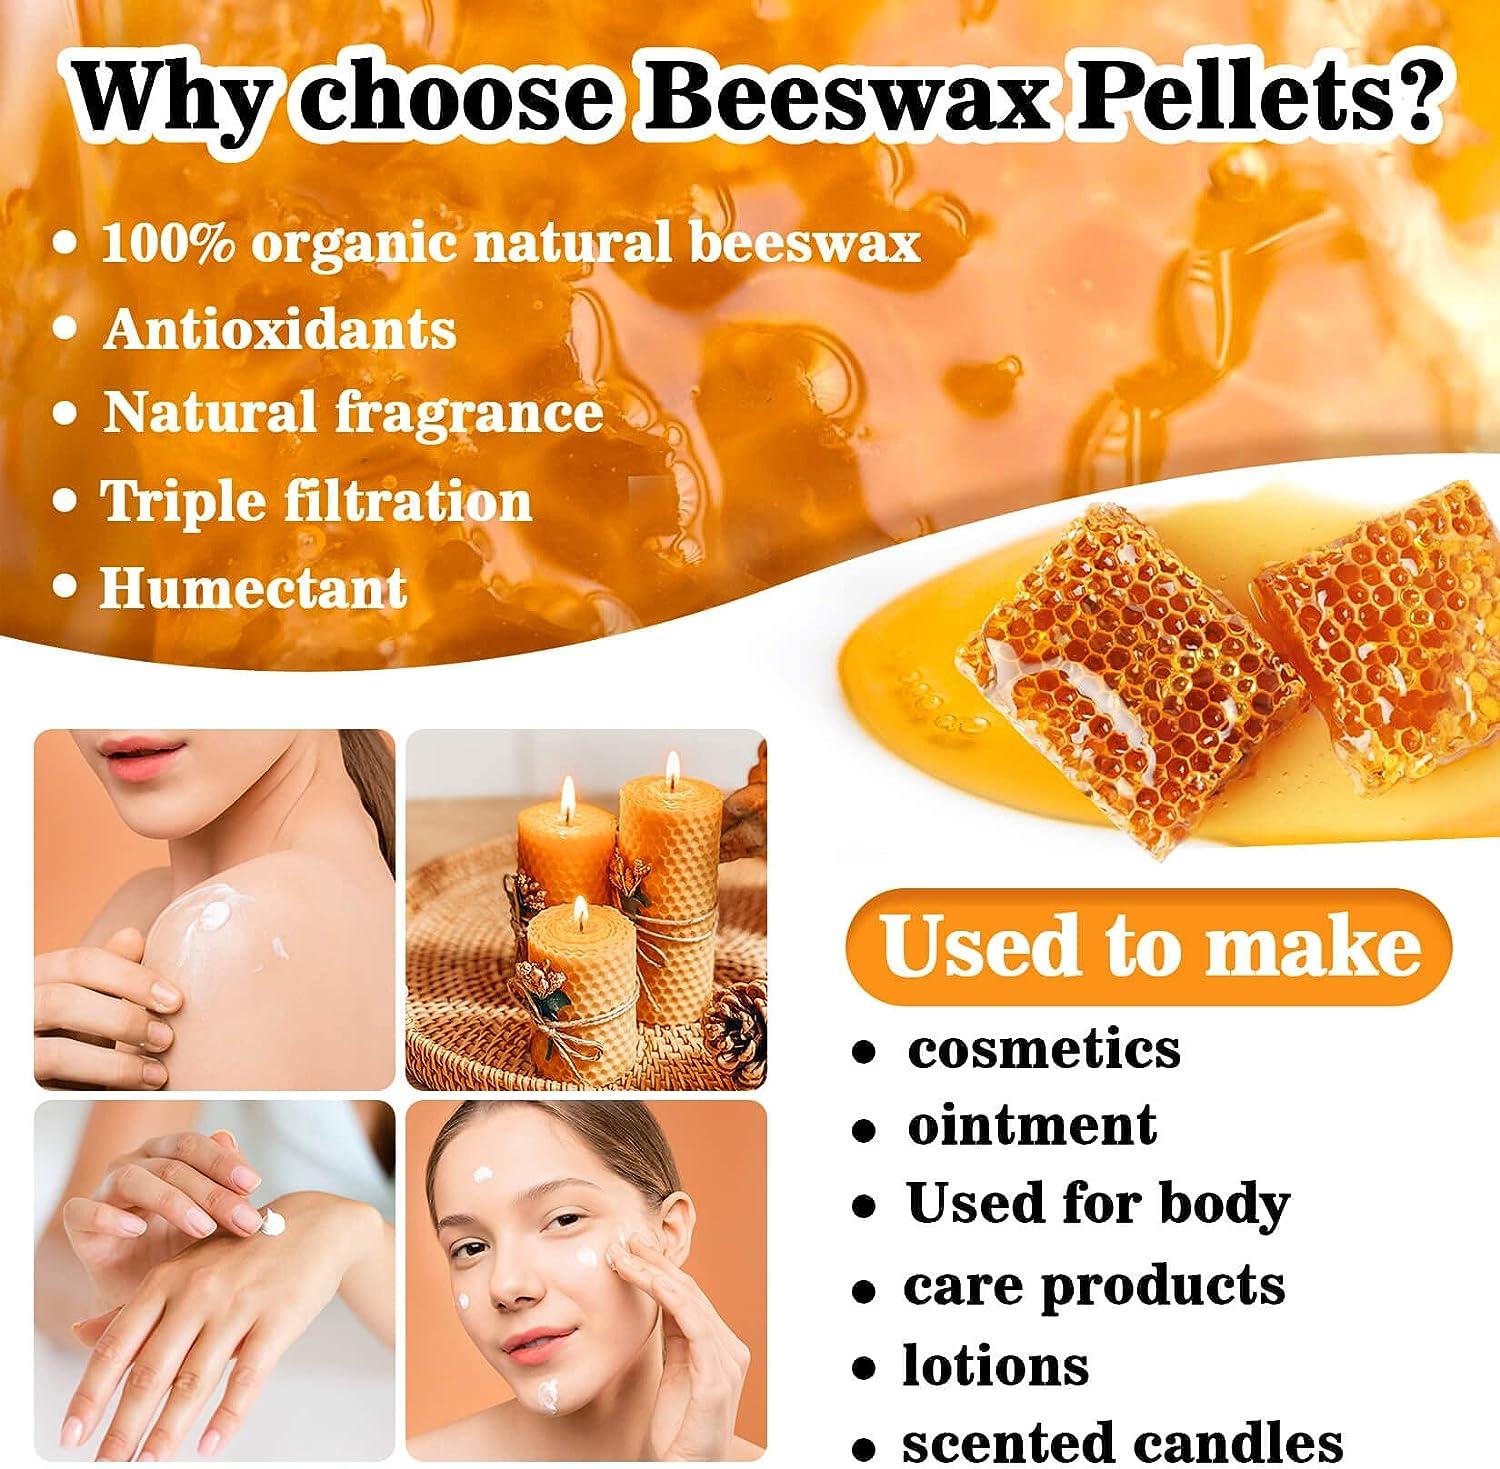 Yellow Organic Natural Beeswax Pellets - CARGEN 453g 100% Beeswax Pastilles  Pure Bulk Bees Wax Pellets Food Grade for DIY Beewax Making Candles Skin  Care Lip Balm Soap Lotion (1lb)